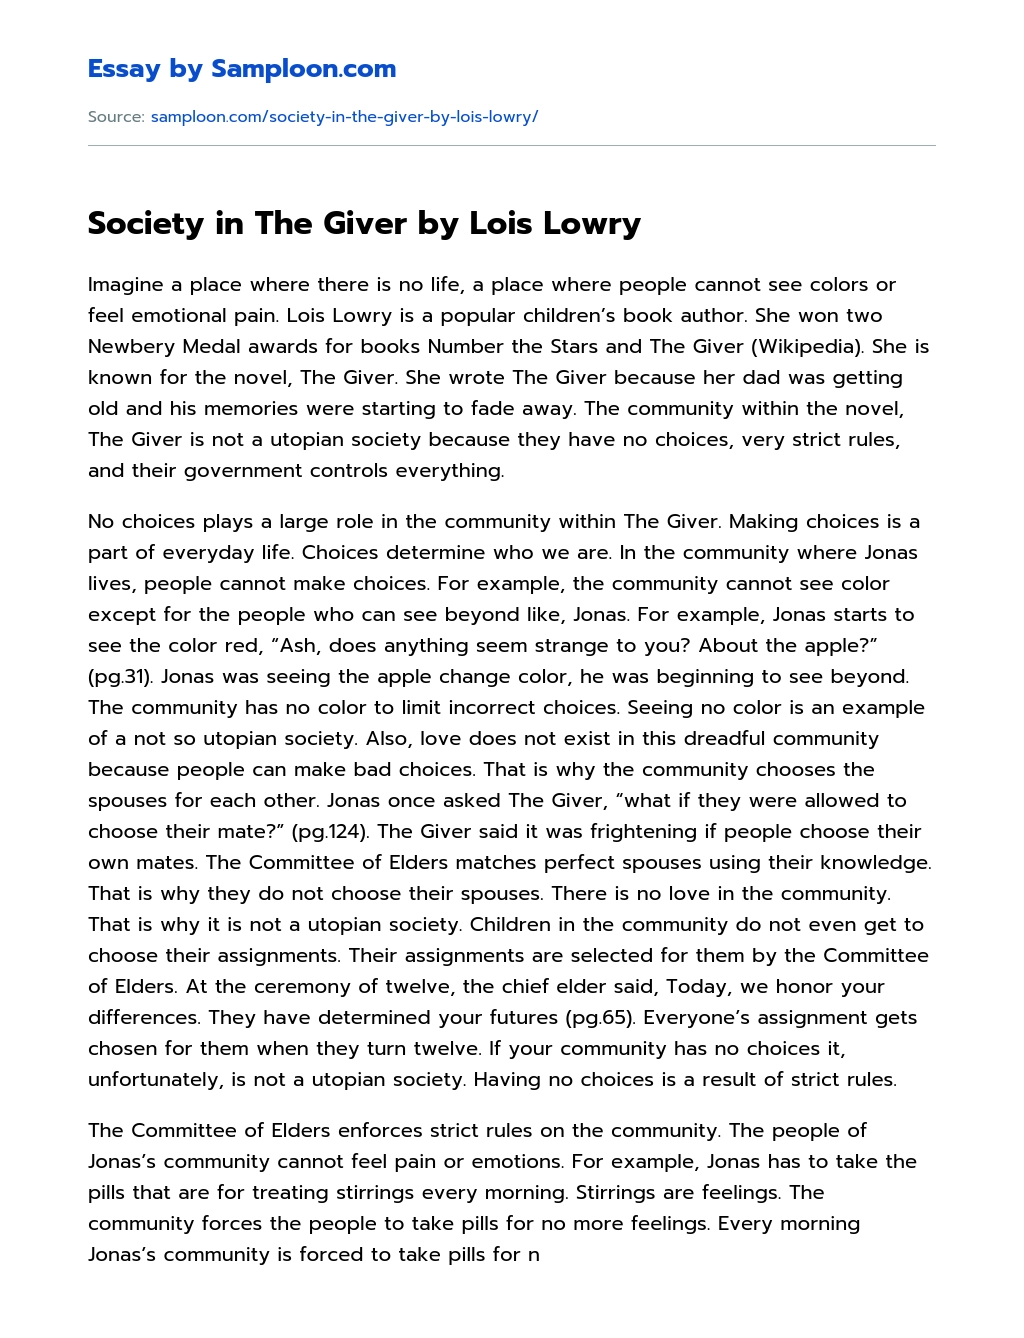 Society in The Giver by Lois Lowry essay